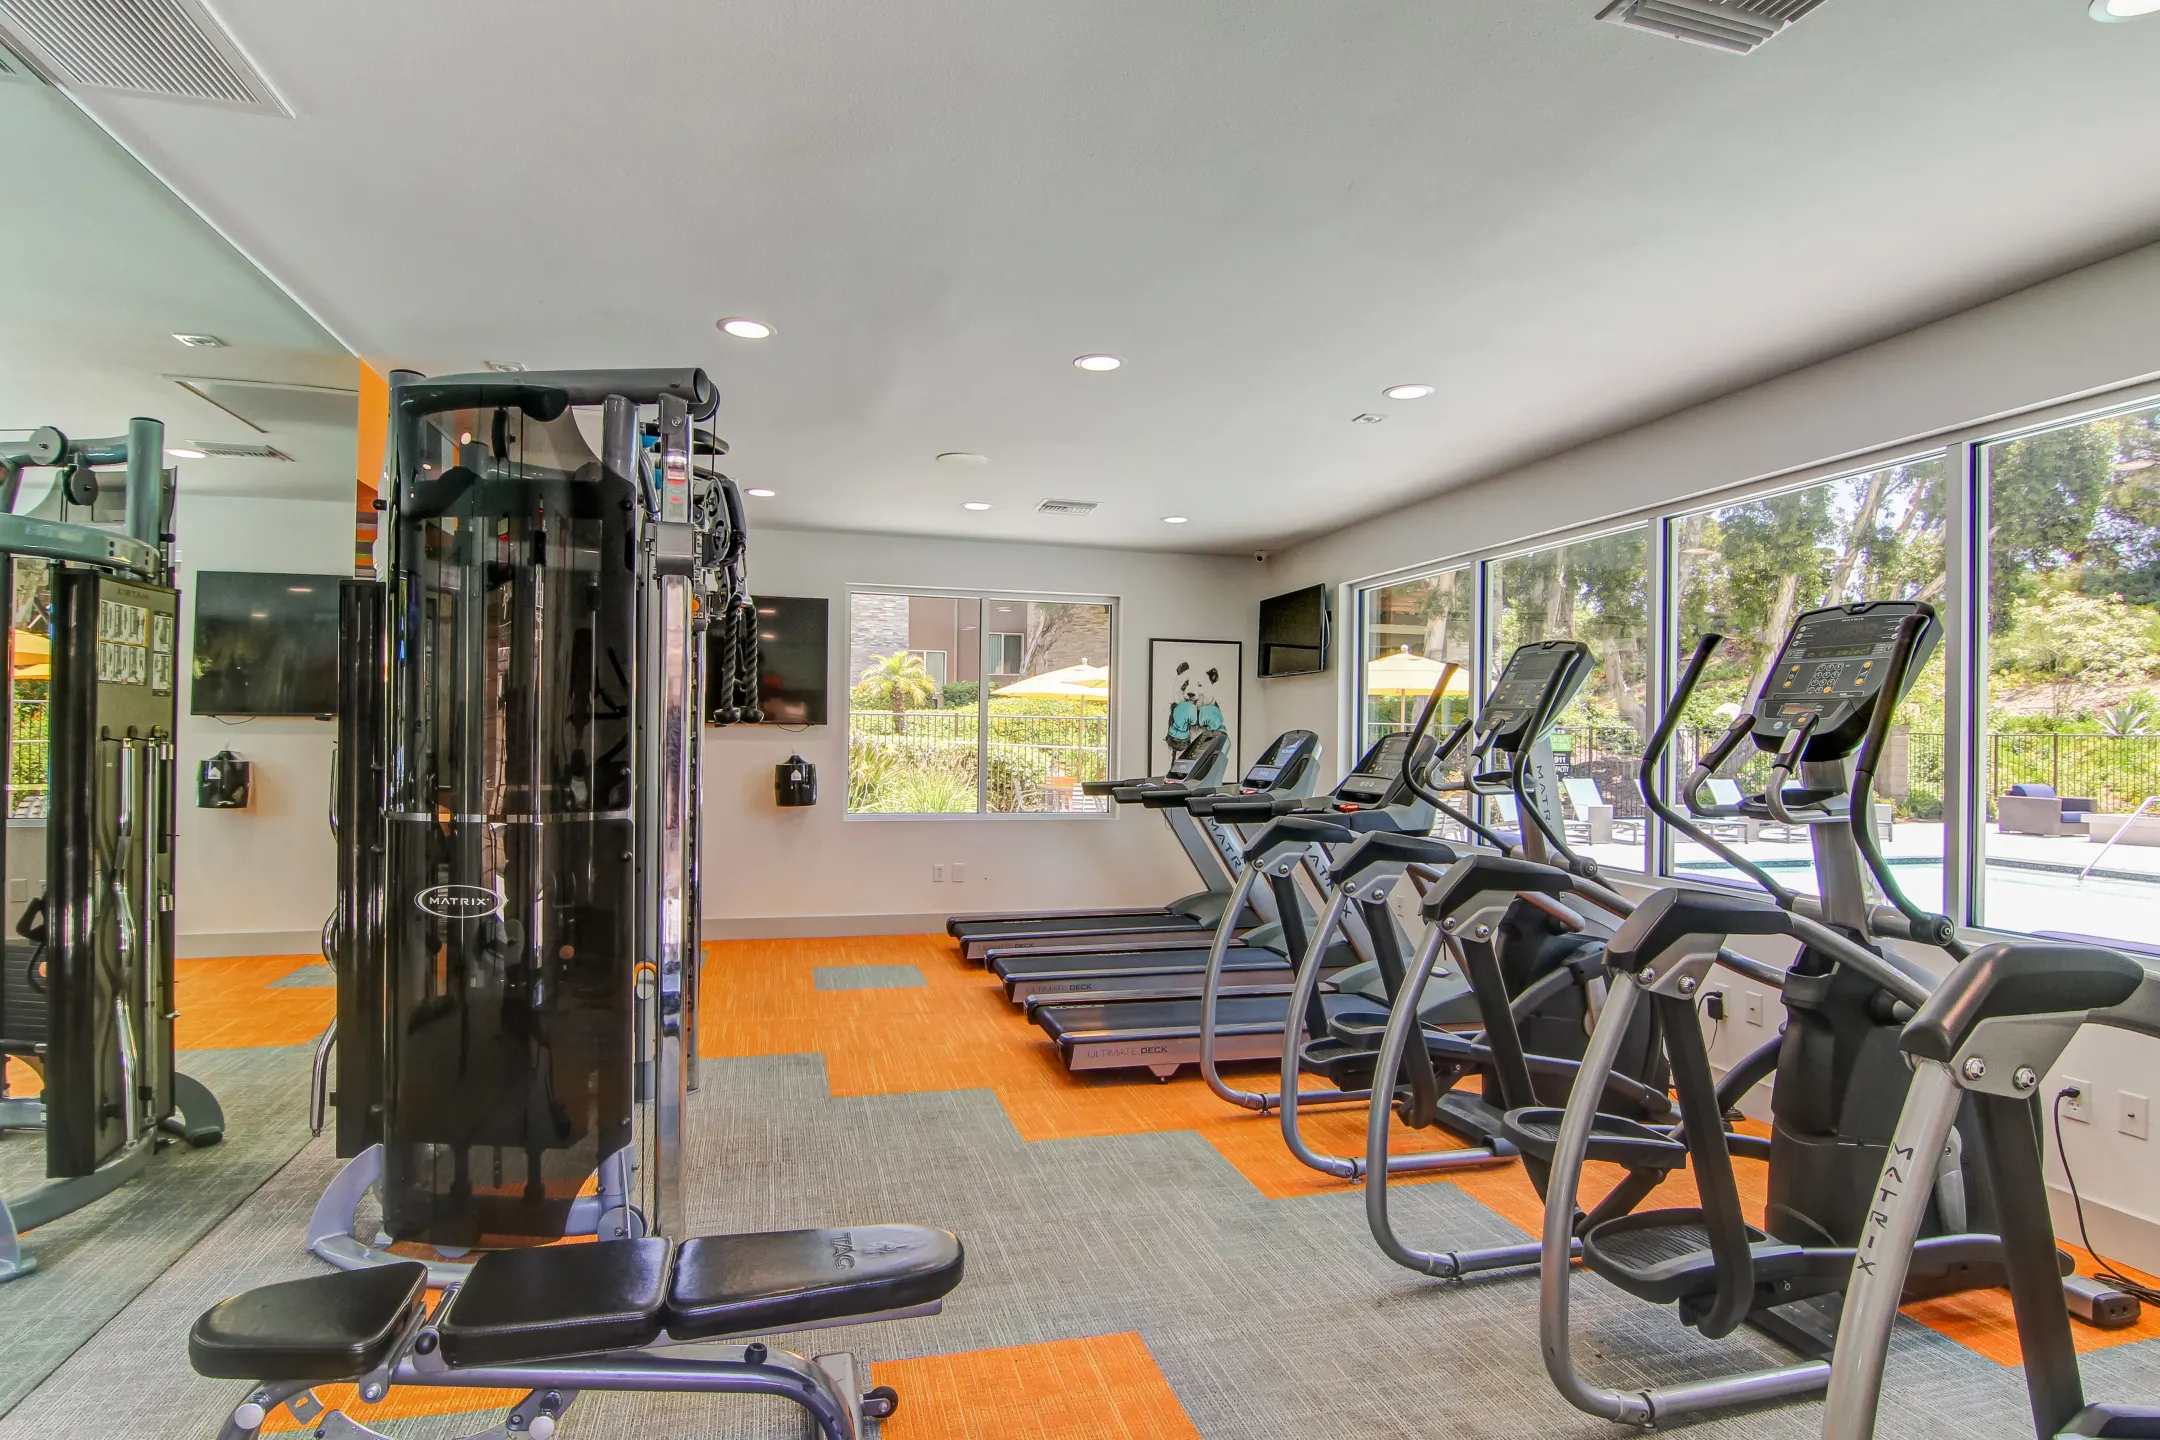 Fitness Weight Room - Idyllwillow - Mission Viejo, CA